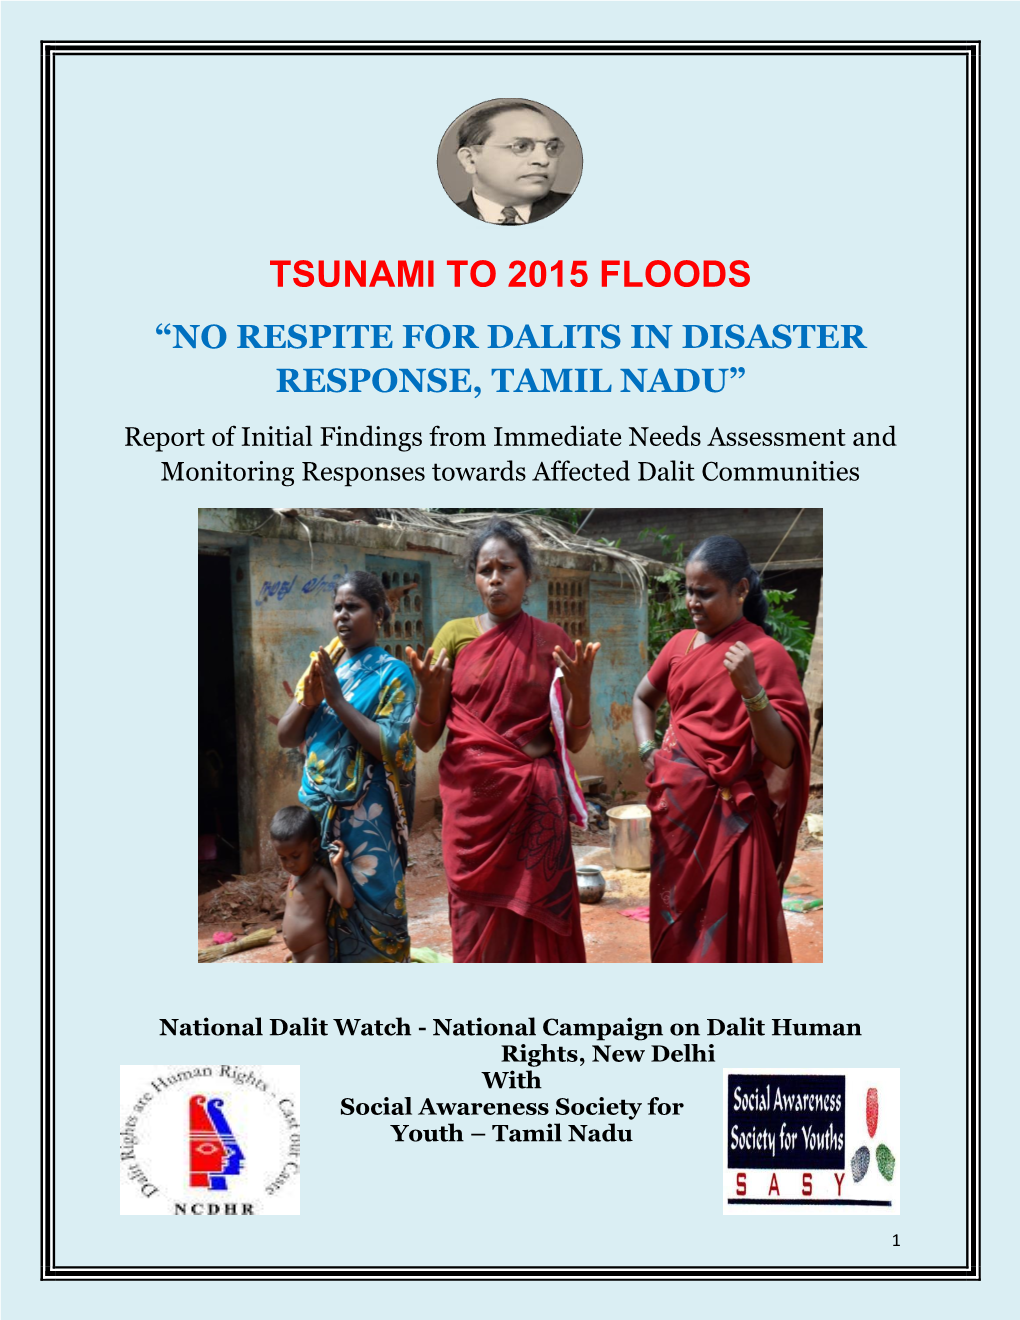 Tsunami to 2015 Floods “No Respite for Dalits in Disaster Response, Tamil